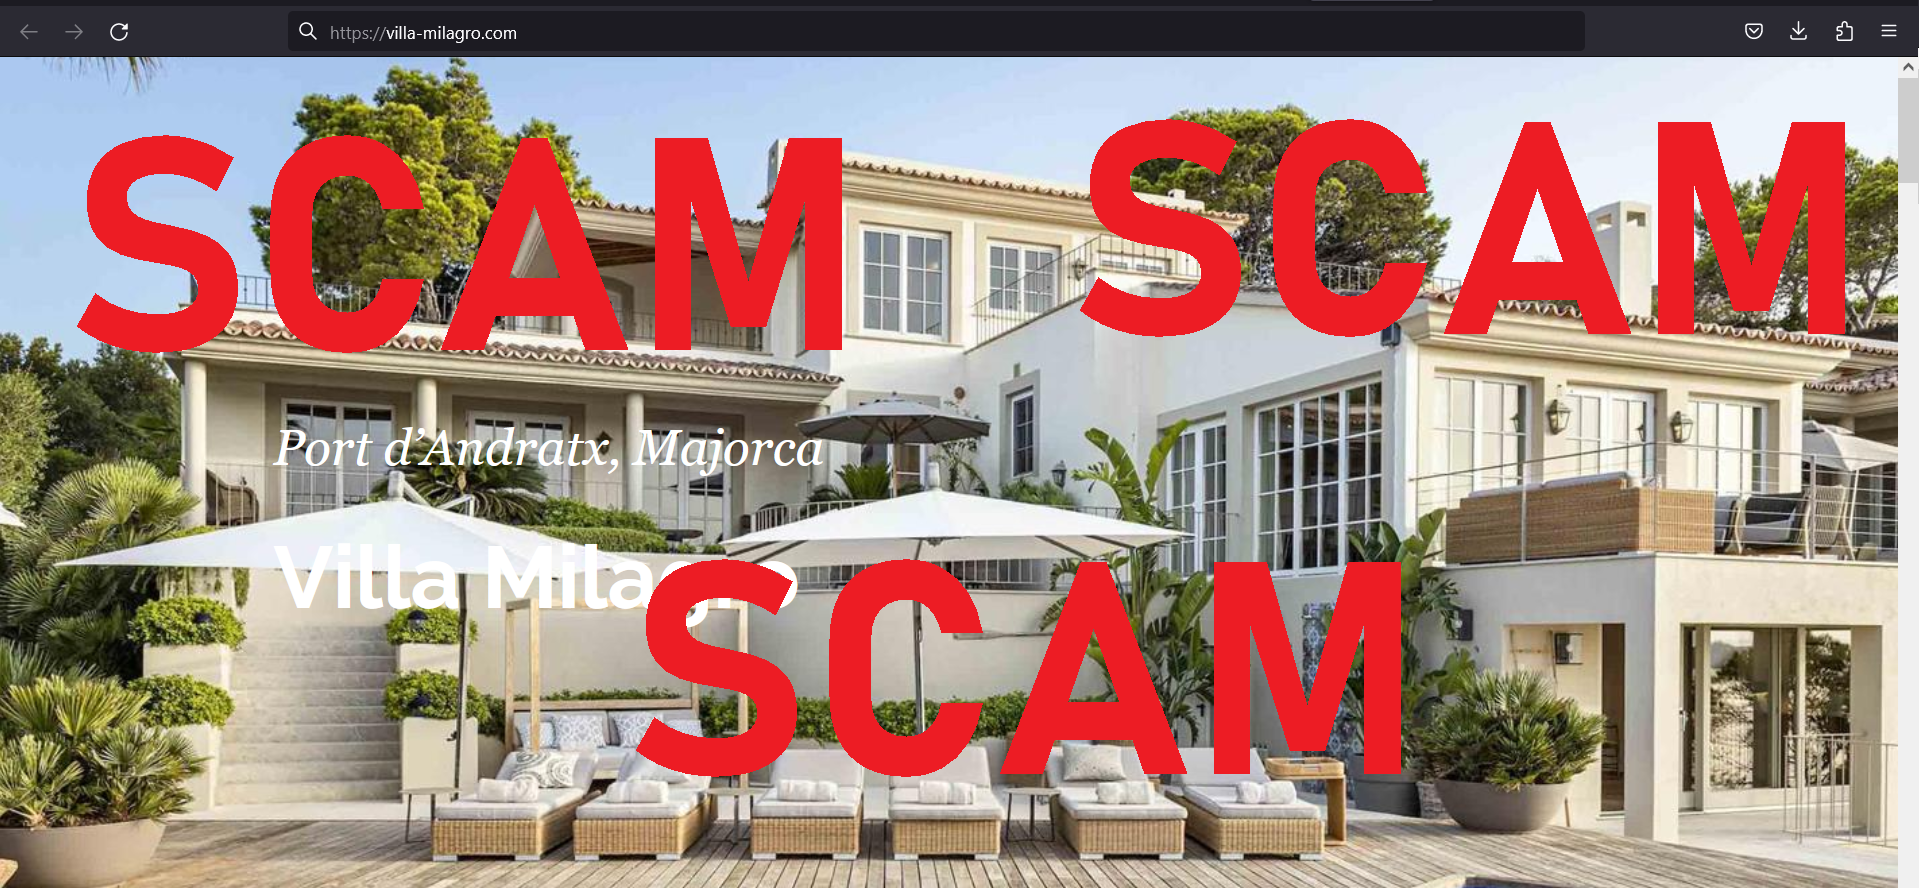 Read more about the article Fraudulent website: villa-milagro.com SCAM SCAM